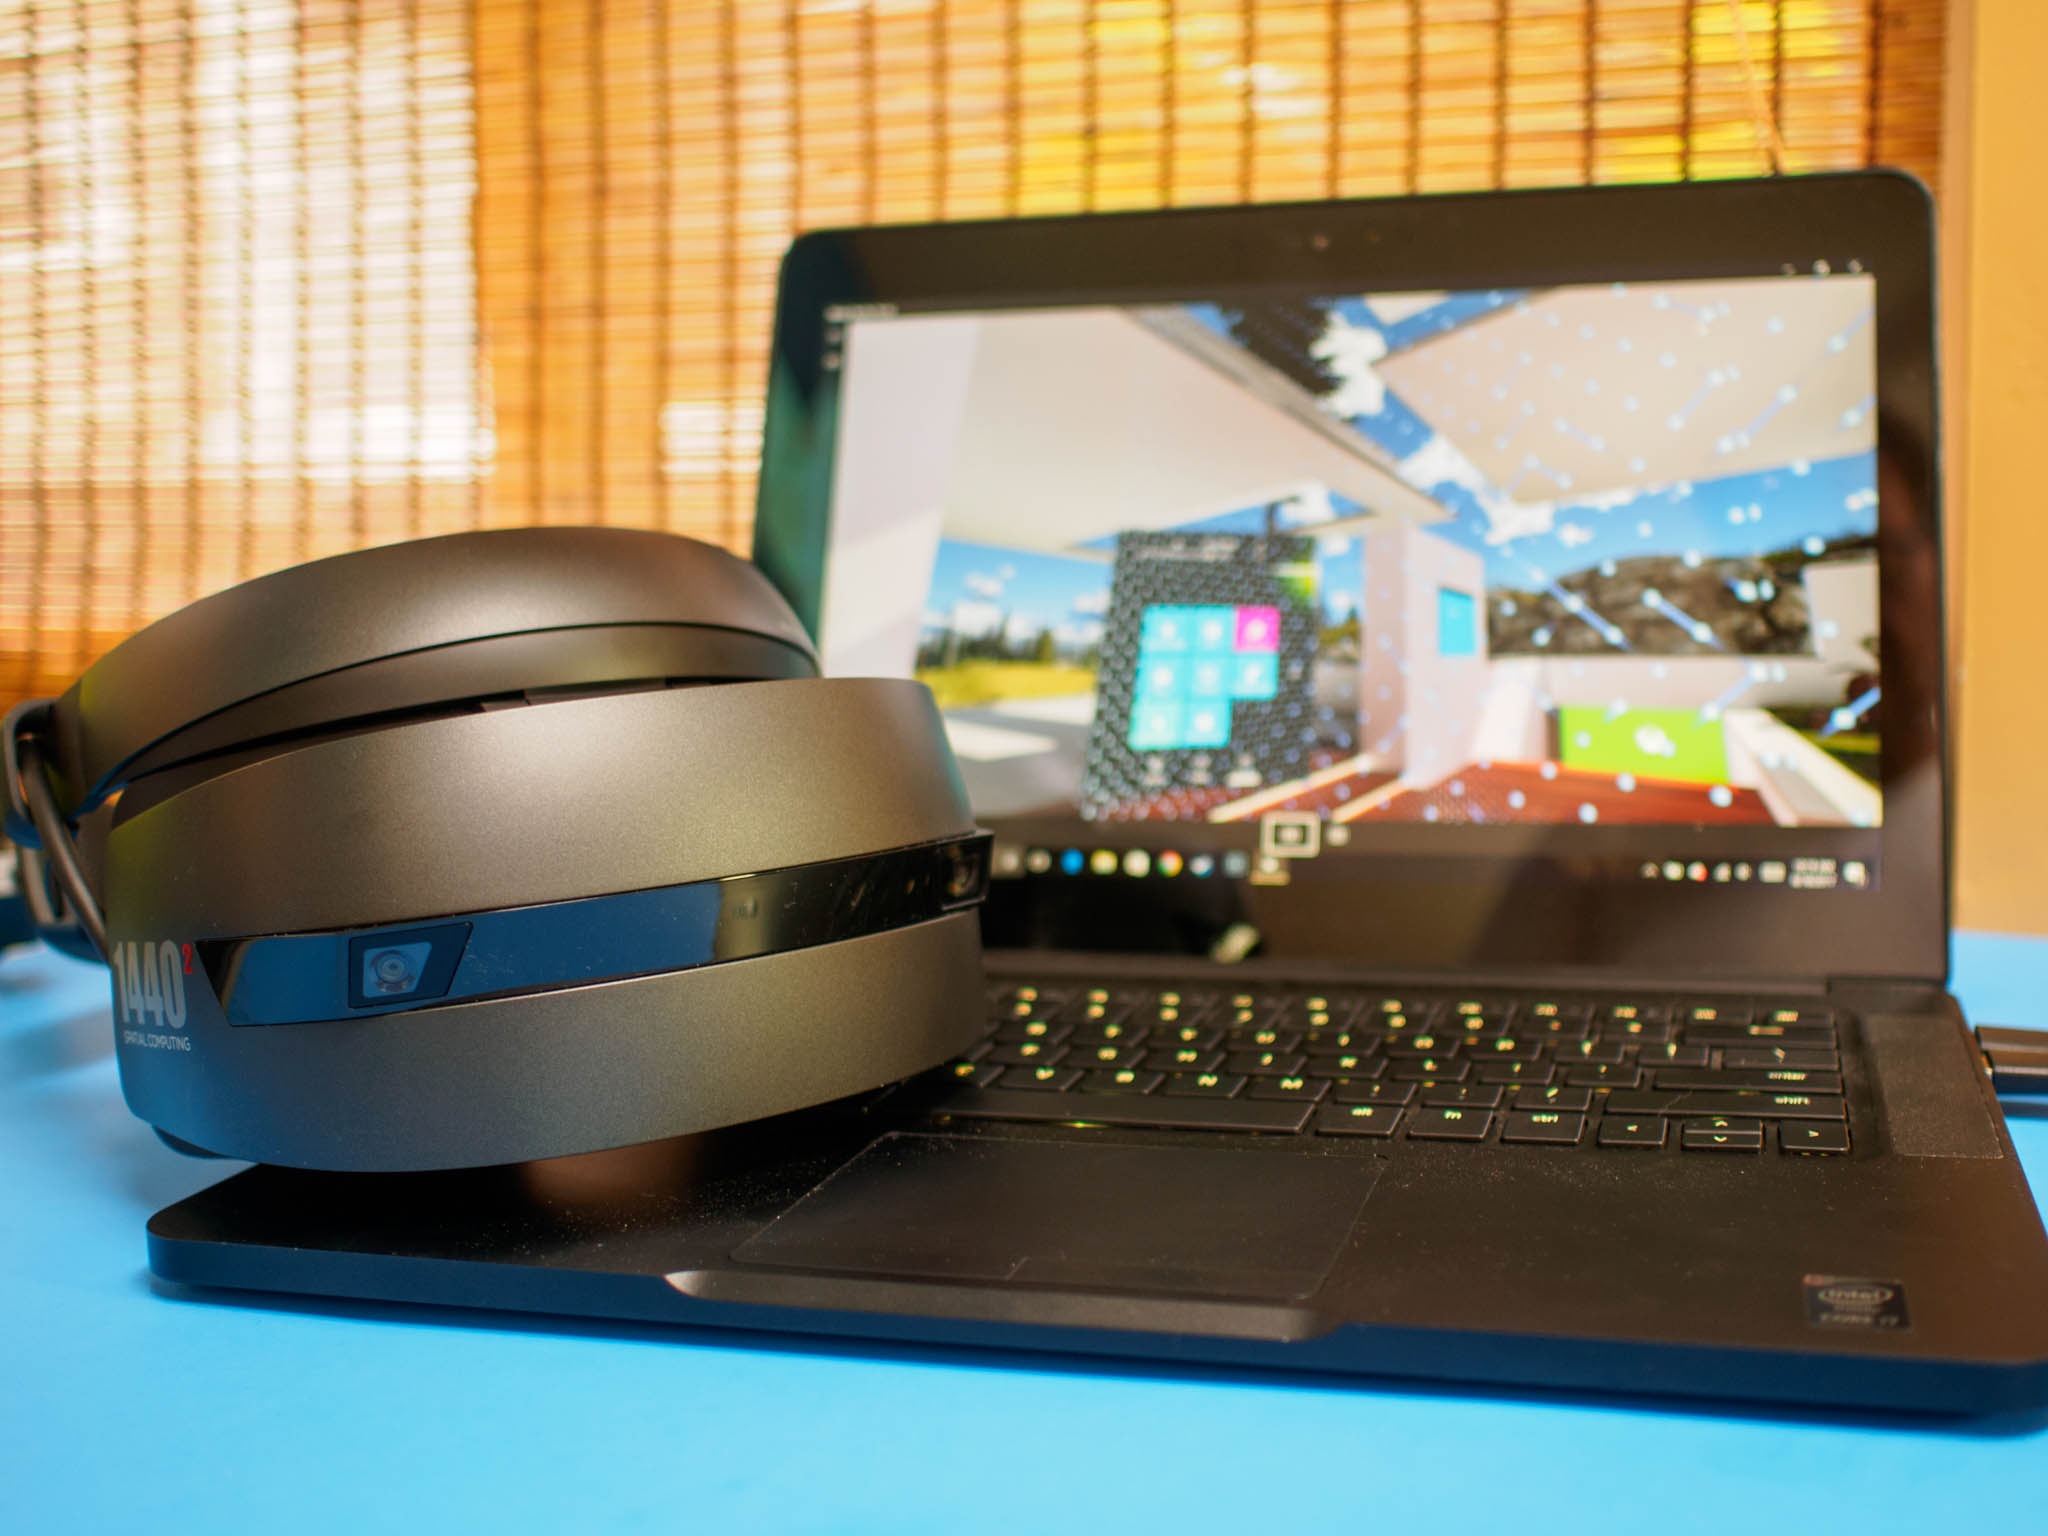 Chime in: What's the best affordable PC for VR or Windows Mixed Reality?